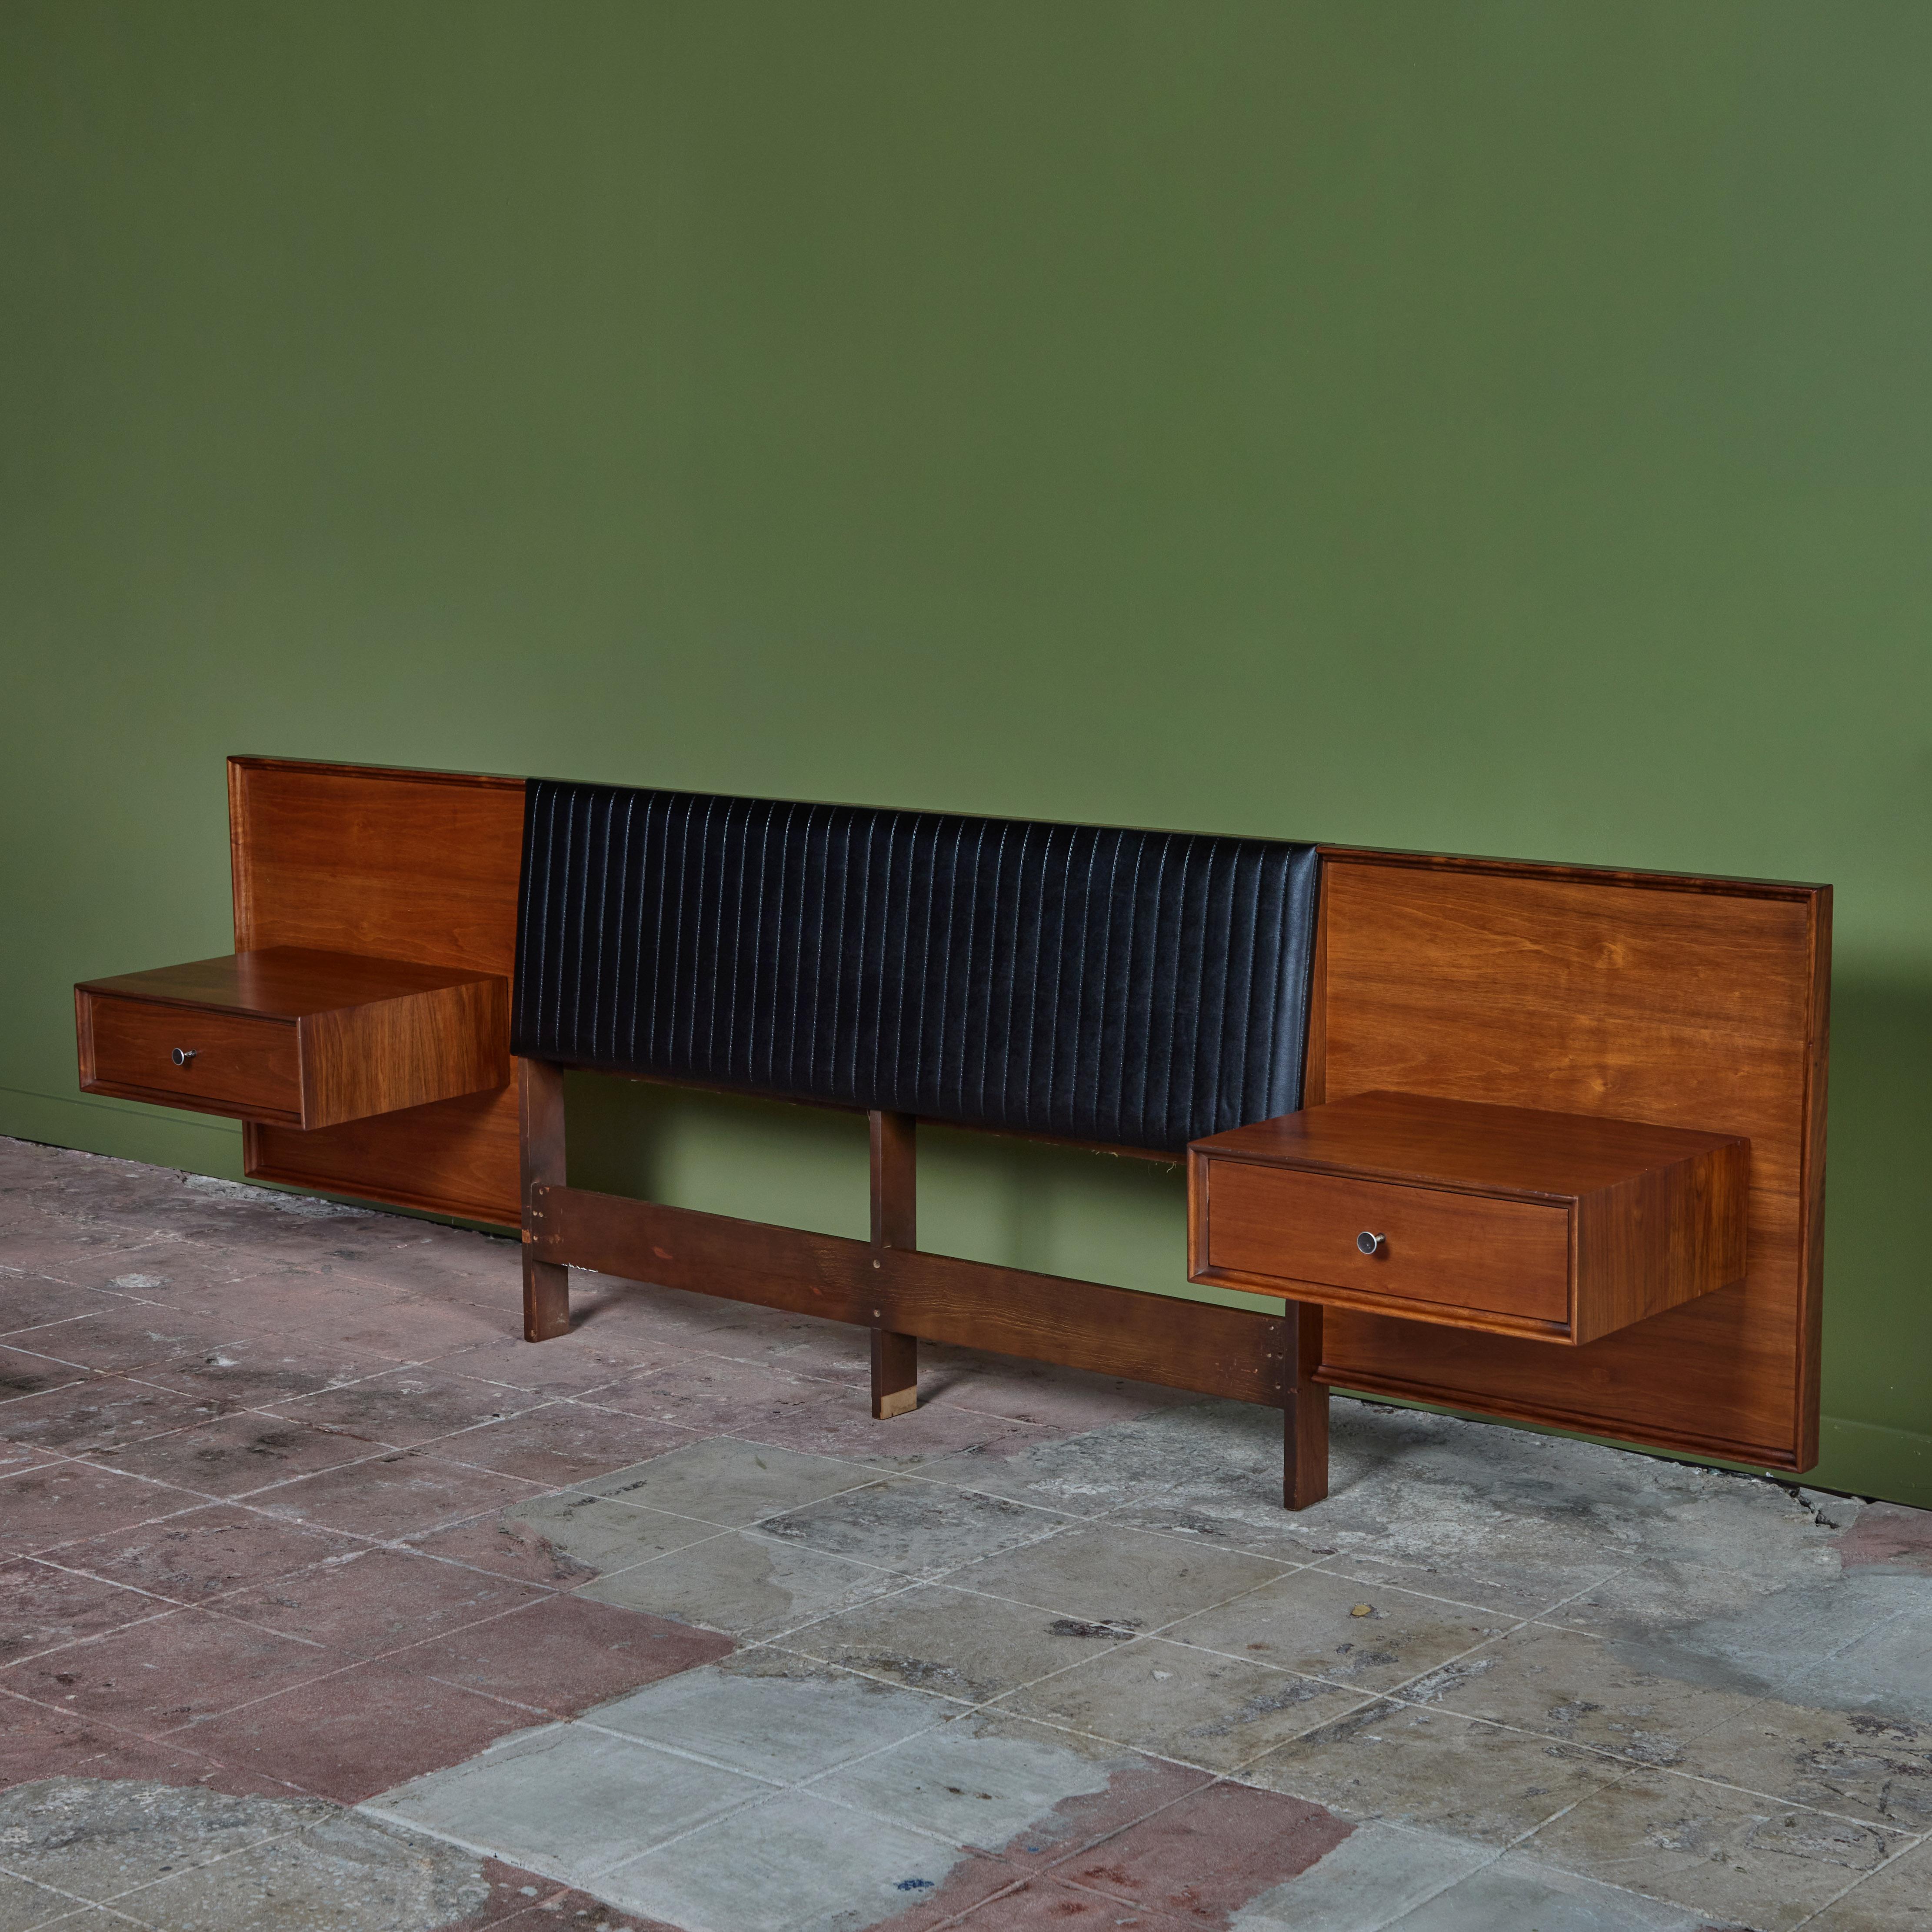 Full size headboard by Robert Baron for Glenn of California c.1960s, USA. The walnut headboard features a vertical stitched Naugahyde headrest with attached nightstands. Each nightstand has one drawer with black enameled pulls.

Dimensions
106.75